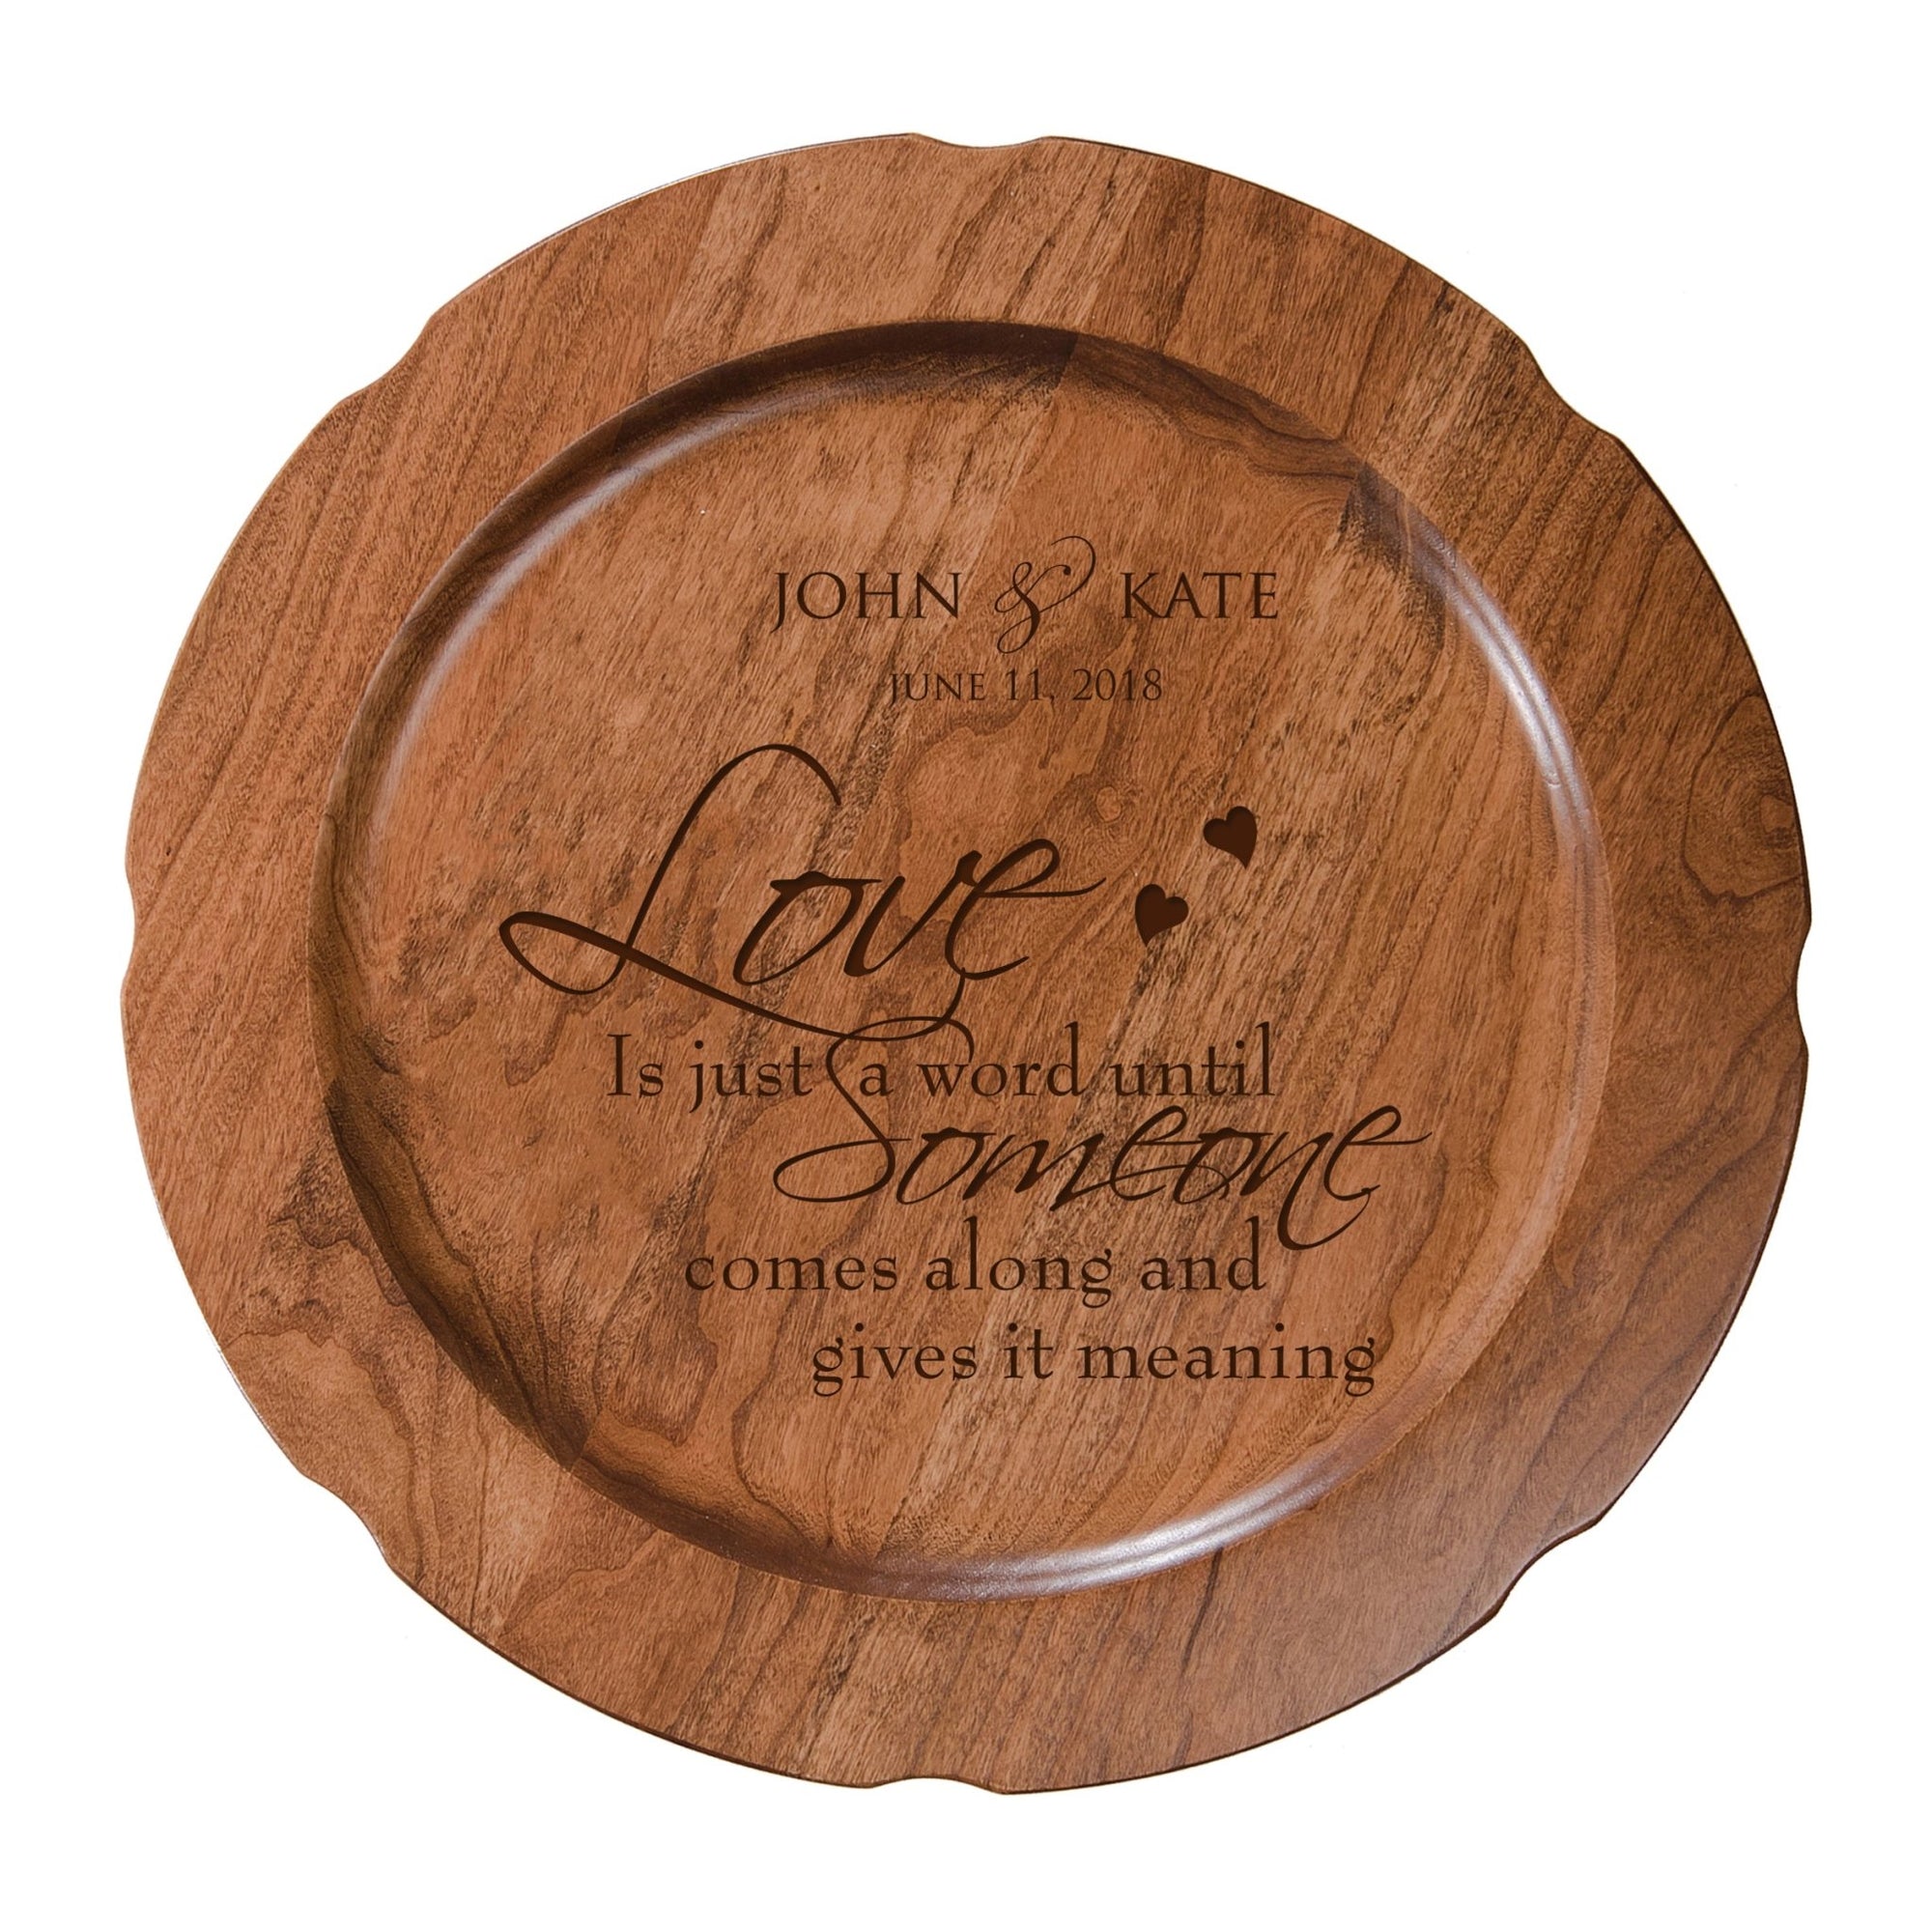 Personalized Inspirational Plates With Quotes - Love Is Just A Word - LifeSong Milestones